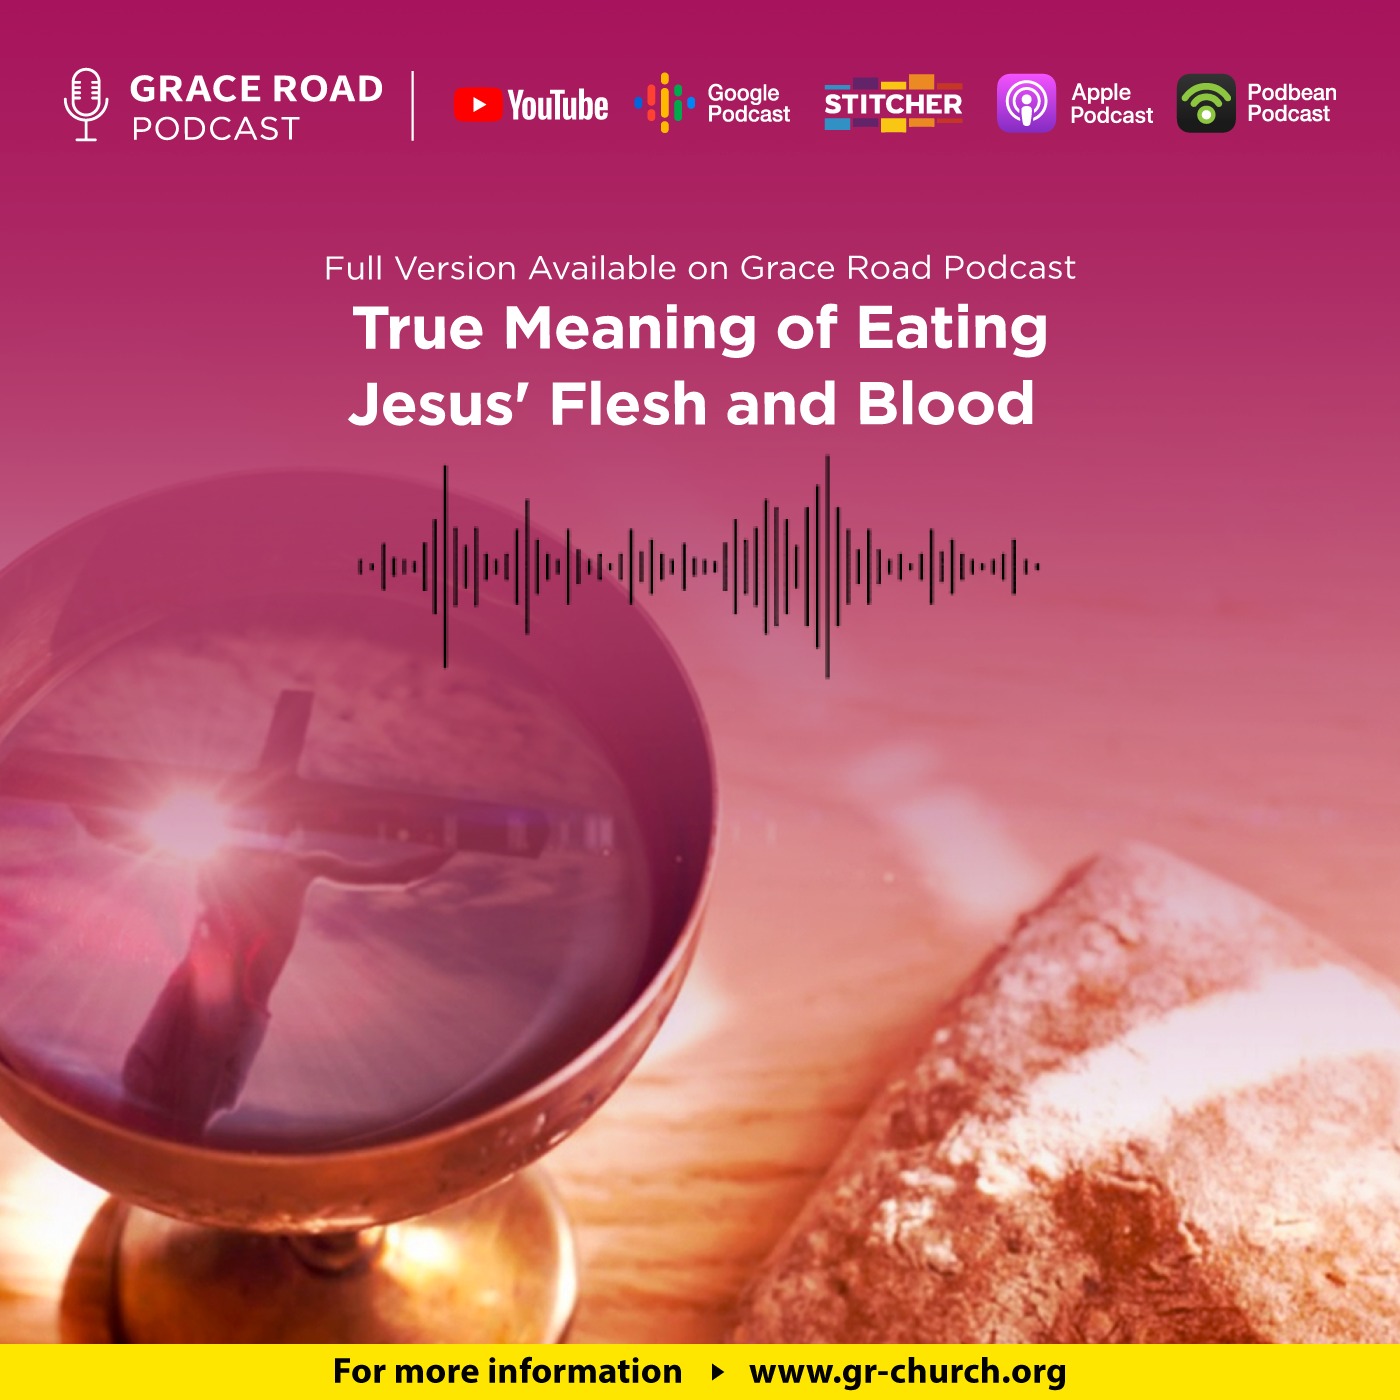 [Trailer] True Meaning of Eating Jesus Flesh and Blood